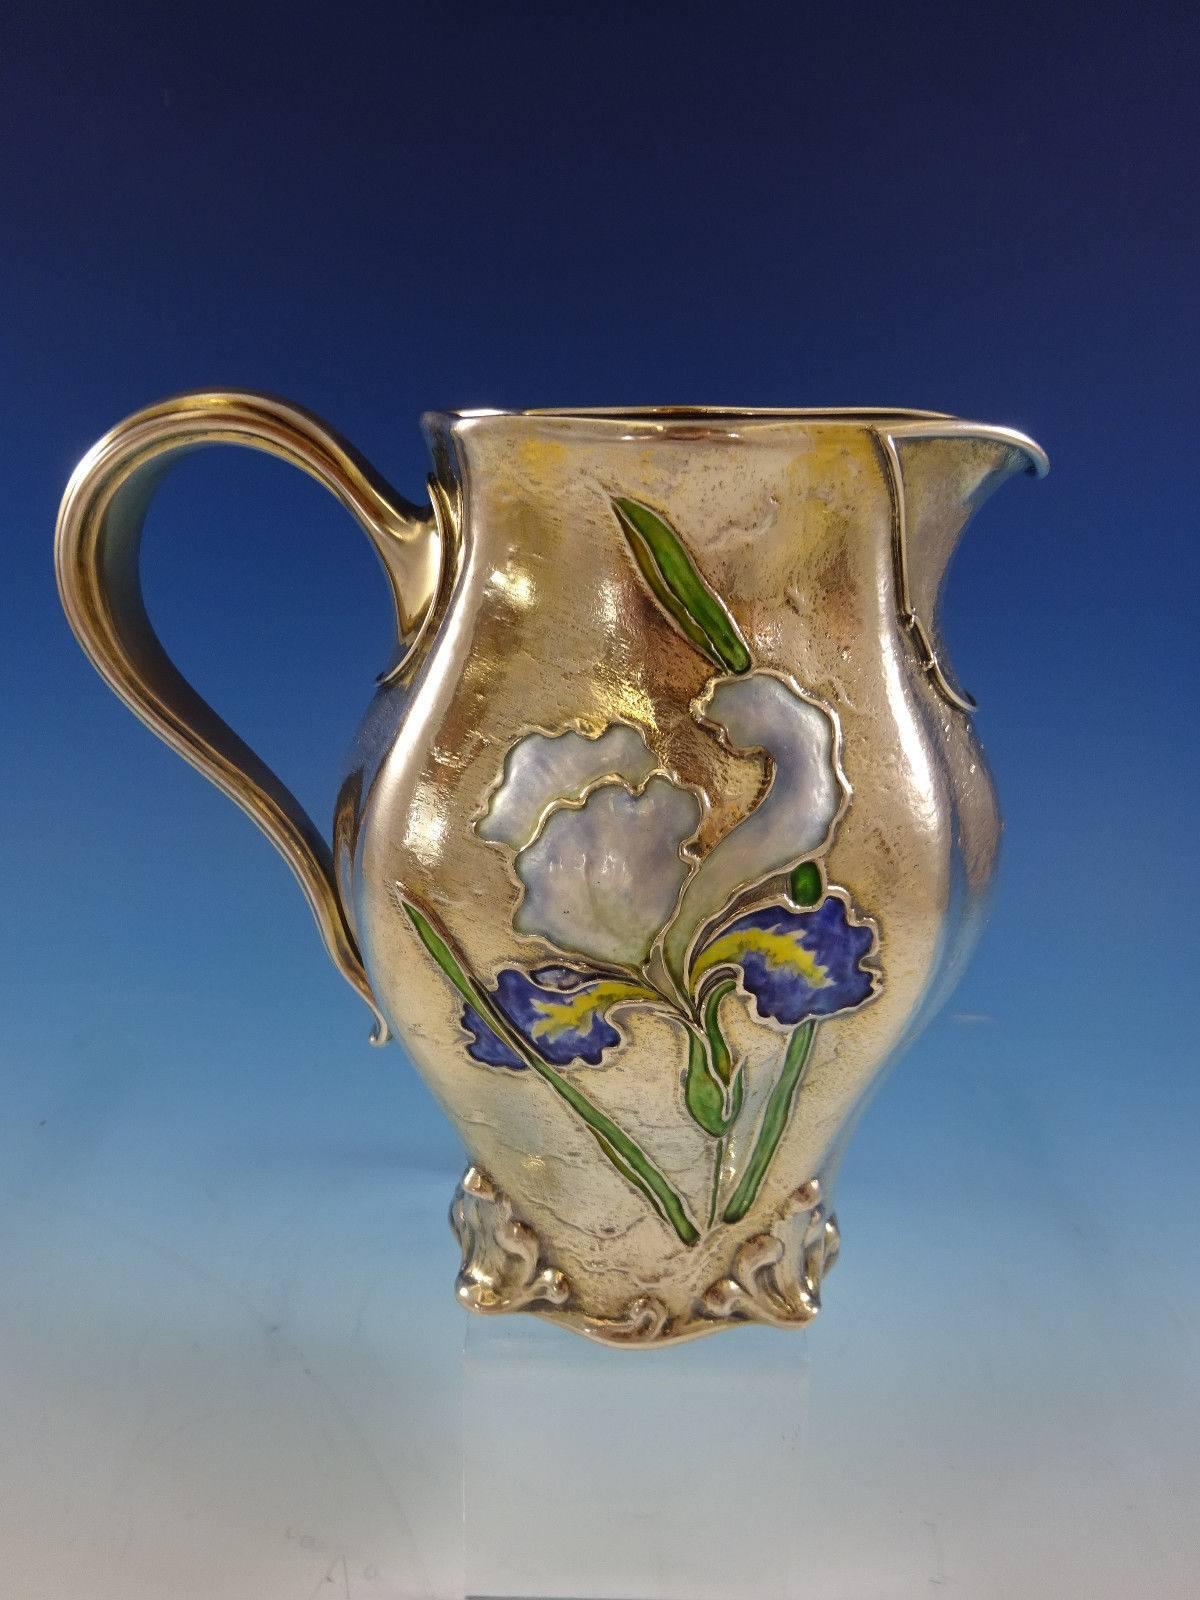 Gorham.
 

Rare sterling silver Vermeil (completely gold-washed) Art Nouveau enameled pitcher made by Gorham with date mark for the year 1897. The front of this fabulous pitcher has a beautifully enameled iris flower. The back of the pitcher has